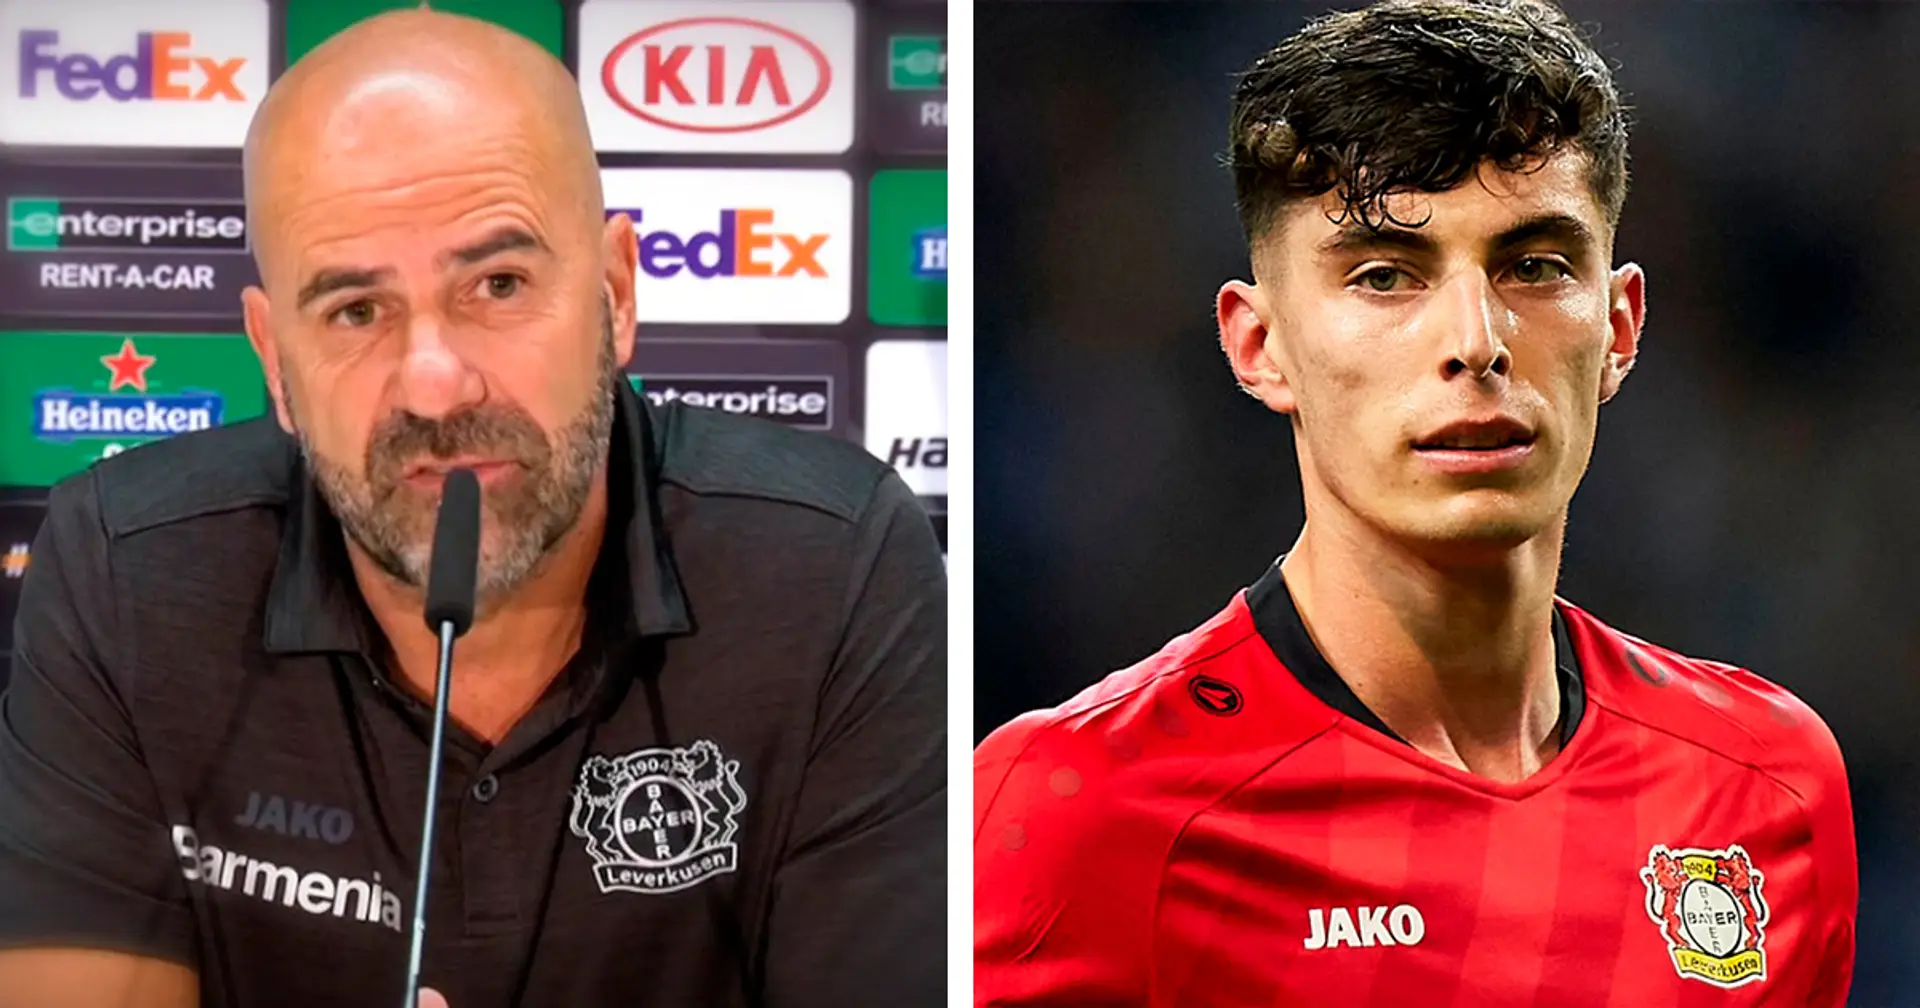 'I can exclusively announce he’ll play for Heracles Almelo': Bayer boss Bosz sarcastically reacts to Havertz question after Inter defeat